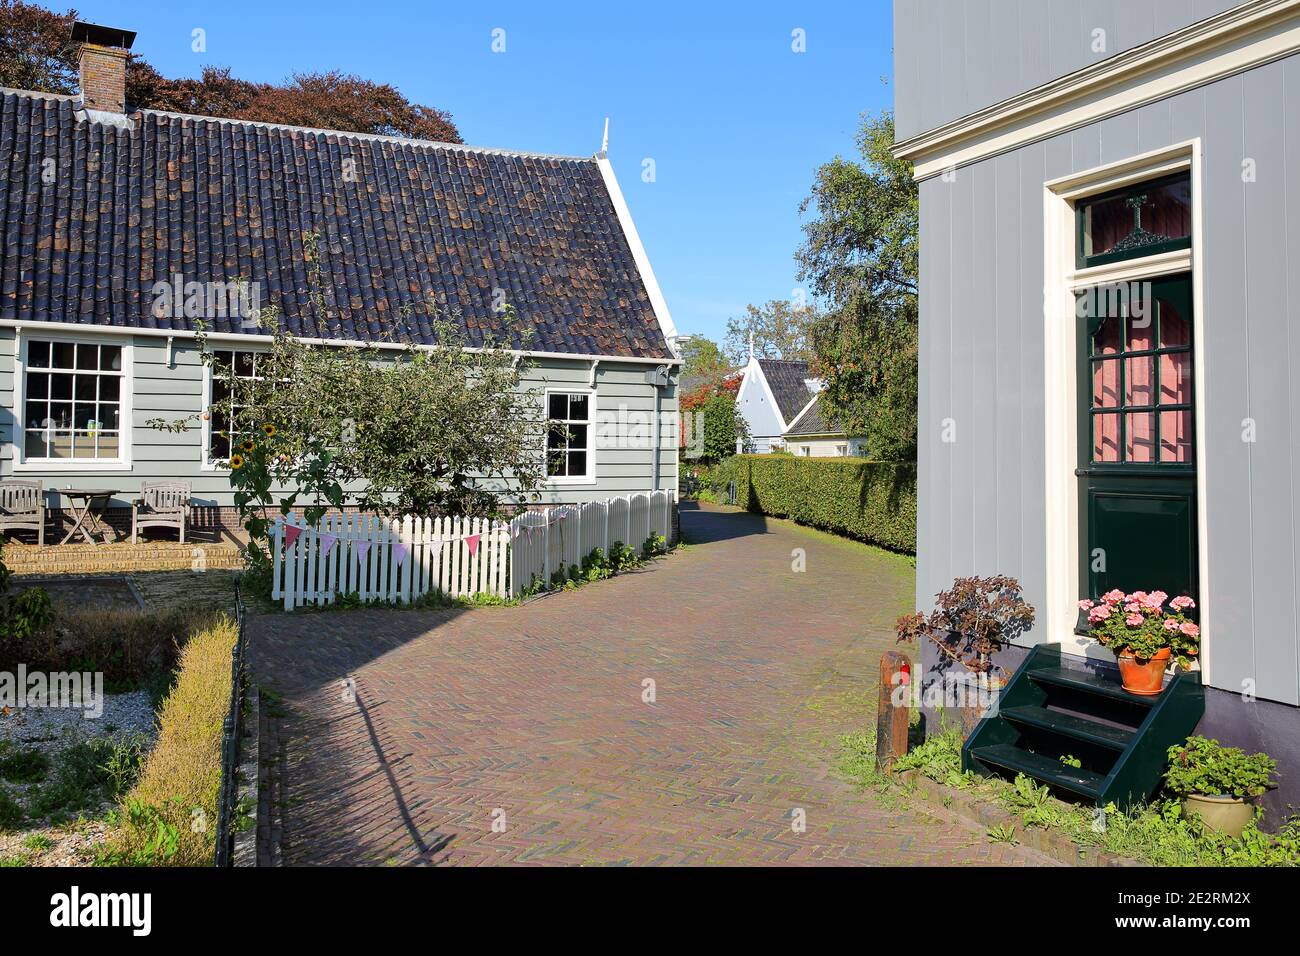 Broek in Waterland, a small town with traditional old and painted wooden houses, North Holland, Netherlands Stock Photo